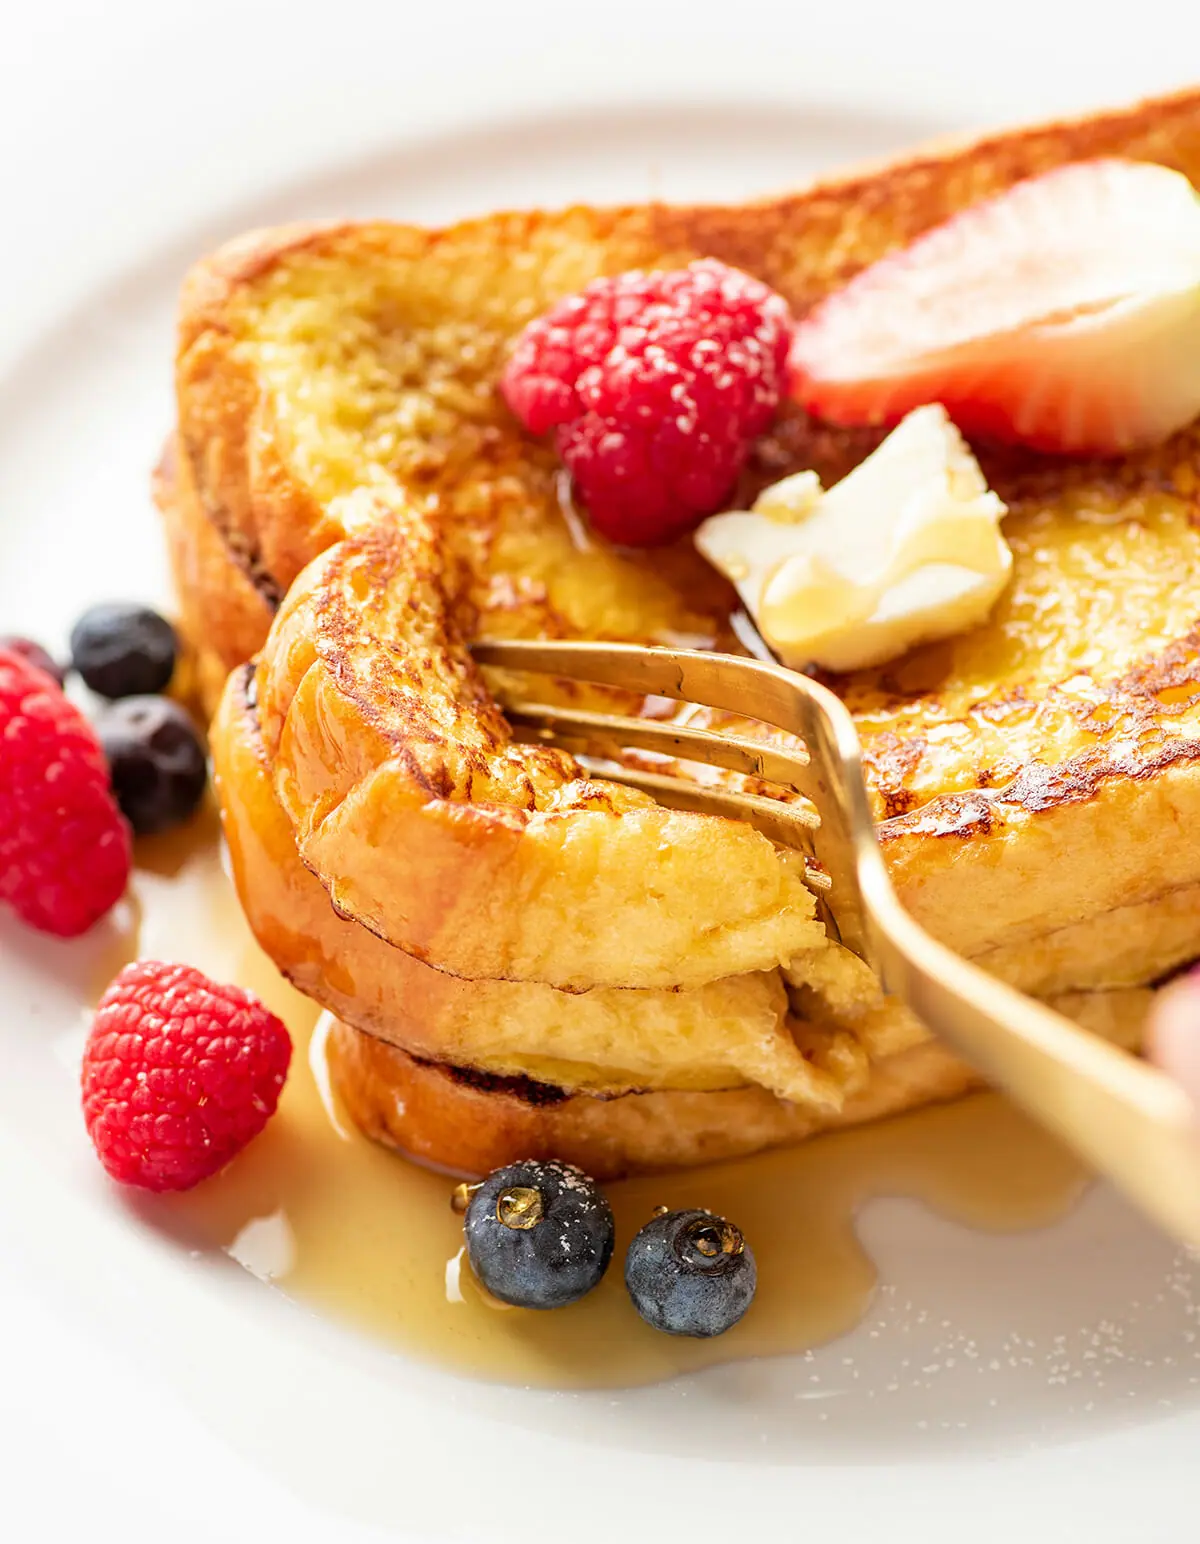 Homemade easy French toast topped with maple syrup and berries